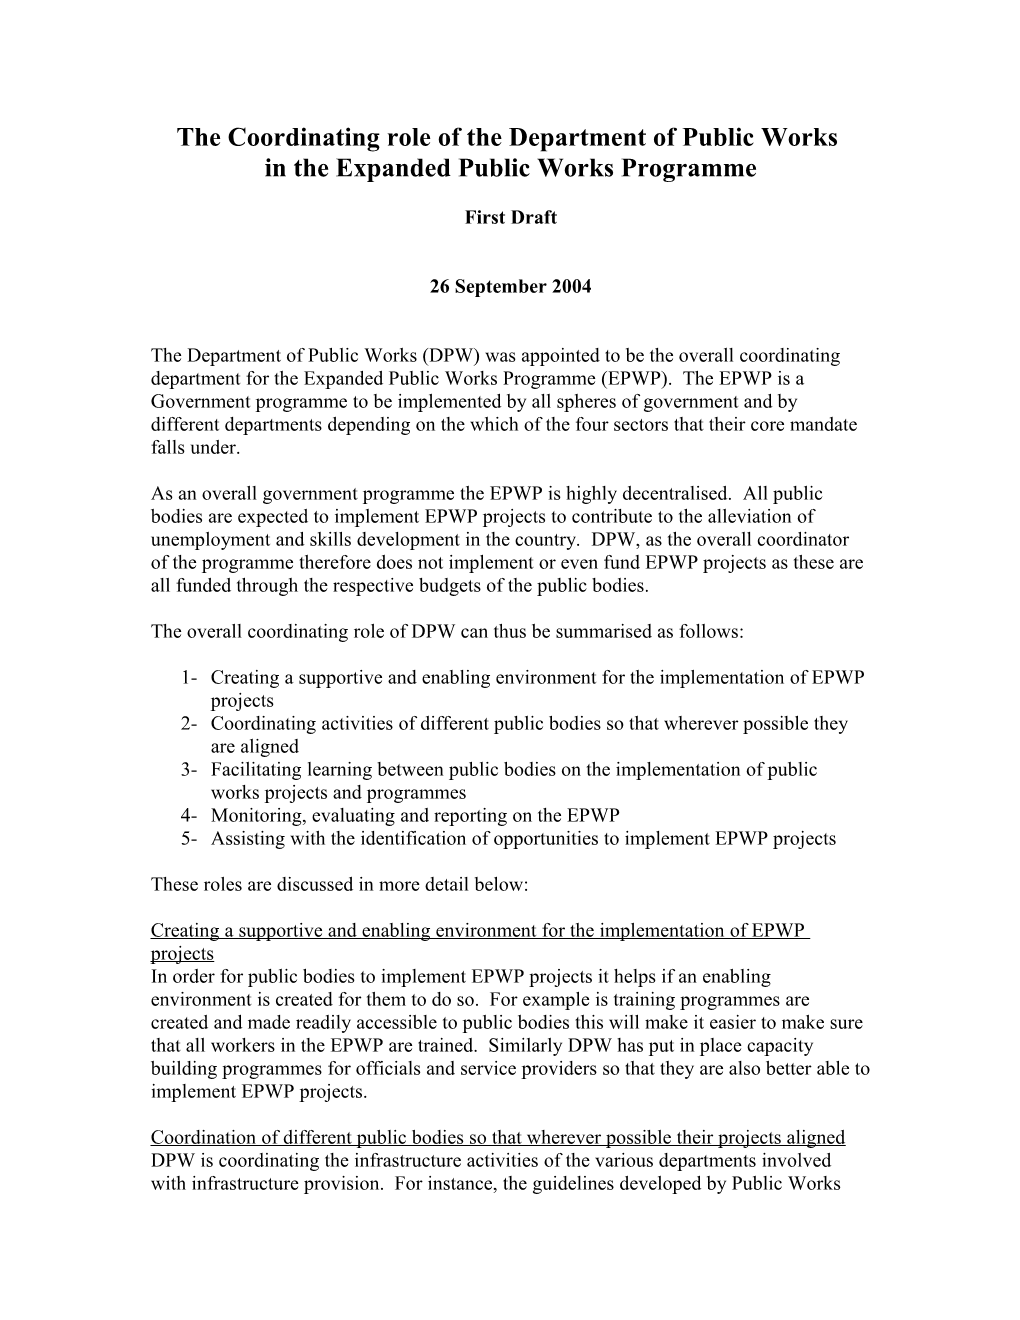 The Coordinating Role of the Department of Public Works in the Expanded Public Works Programme